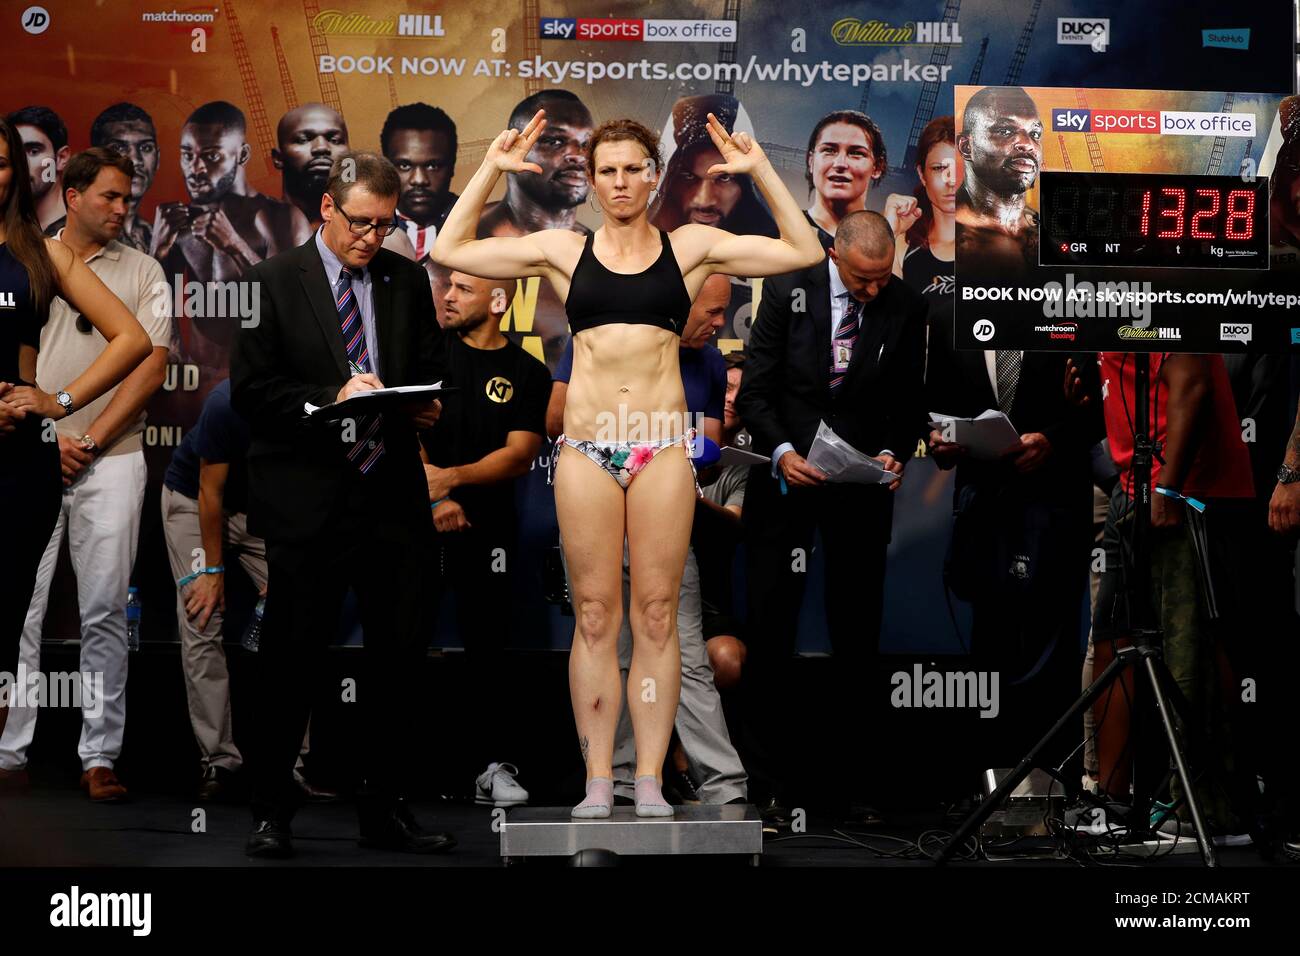 Boxing - Katie Taylor v Kimberly Connor Weigh-In - Spitalfields Market,  London, Britain - July 27, 2018 Kimberly Connor during the Weigh-In Action  Images via Reuters/John Sibley Stock Photo - Alamy